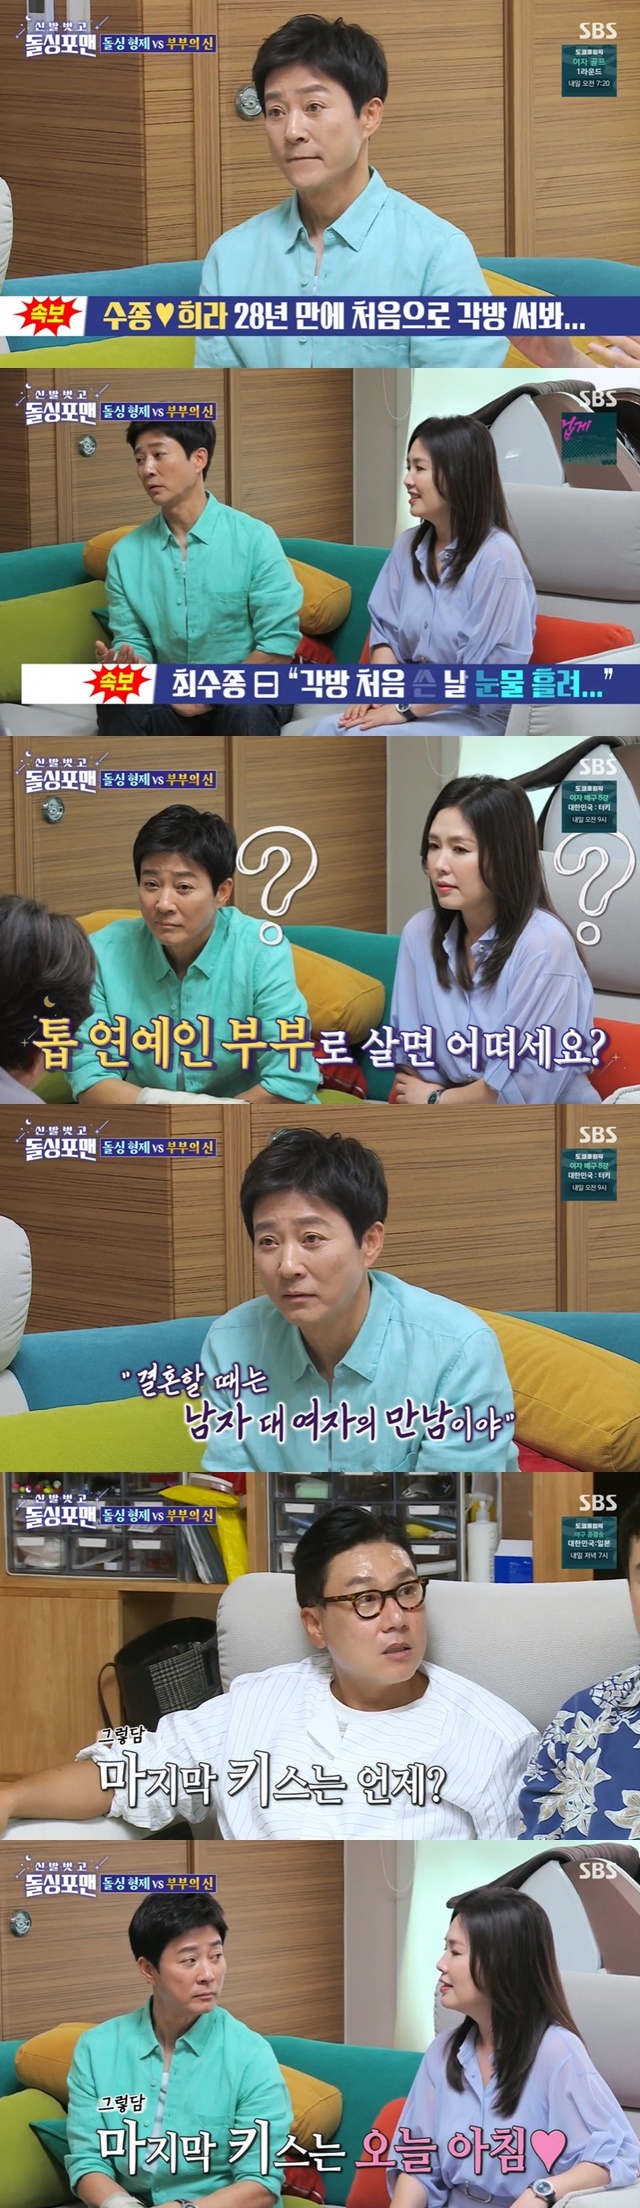 Choi Soo-jong Ha Hee-ra revealed the marriage gold that still lasted with final kiss this morning with the story of the first room in 28 years of marriage.Choi Soo-jong Ha Hee-ra appeared on SBS Take off your shoes and dolsing foreman broadcast on August 3.Ha Hee-ra said that Choi Soo-jong hurt his arm and wrote the first room in 28 years of marriage in 1993, saying, I will touch my arm while sleeping.Choi Soo-jong said, I first slept in another room. I could not sleep, I cried alone.Tak Jae-hun then asked, How about living with a top entertainer couple, I have never done it before? Choi Soo-jong said, Where are entertainers living together?Marriage is a meeting between a man and a woman. Tak Jae-hun said, How did such a person play his sister-in-law? And Ha Hee-ra explained, It was not a kiss I see in movies these days, but a kiss.As for rumors that he did not even talk about the cut, Choi Soo-jong explained, Thats the bosss mishap. I can not take it off.When Kim Jun-ho asked, When is the real kiss? Choi Soo-jong replied, I do not remember well. When Lee Sang-min asked, How is the last kiss? Choi Soo-jong replied, This morning.